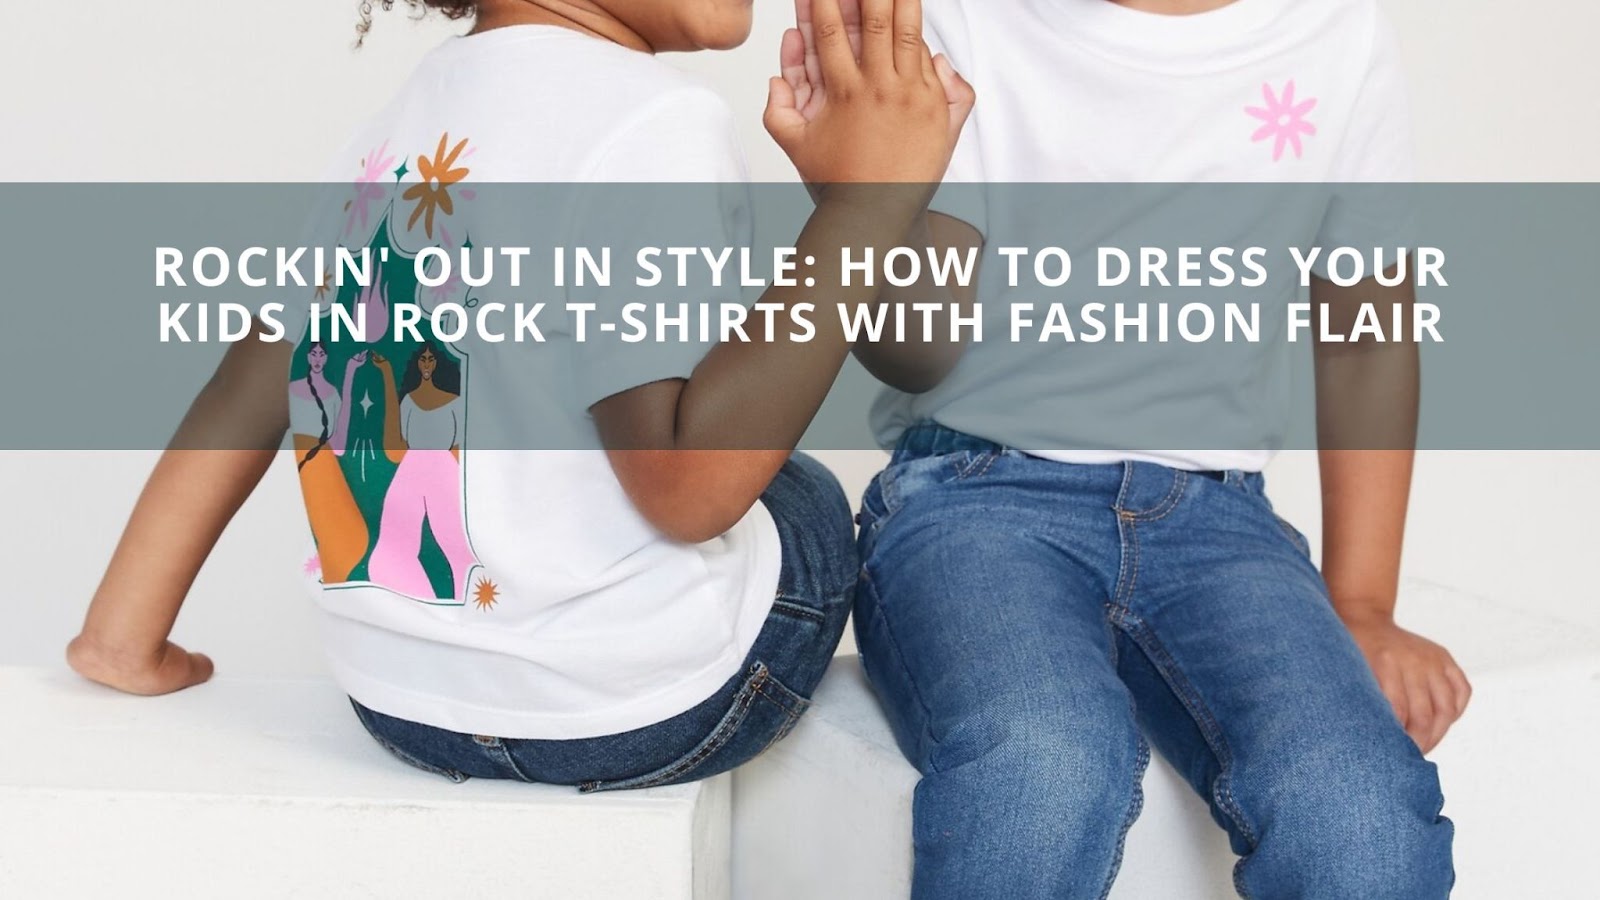 Rockin' Out in Style: How to Dress Your Kids in Rock T-Shirts with Fashion Flair